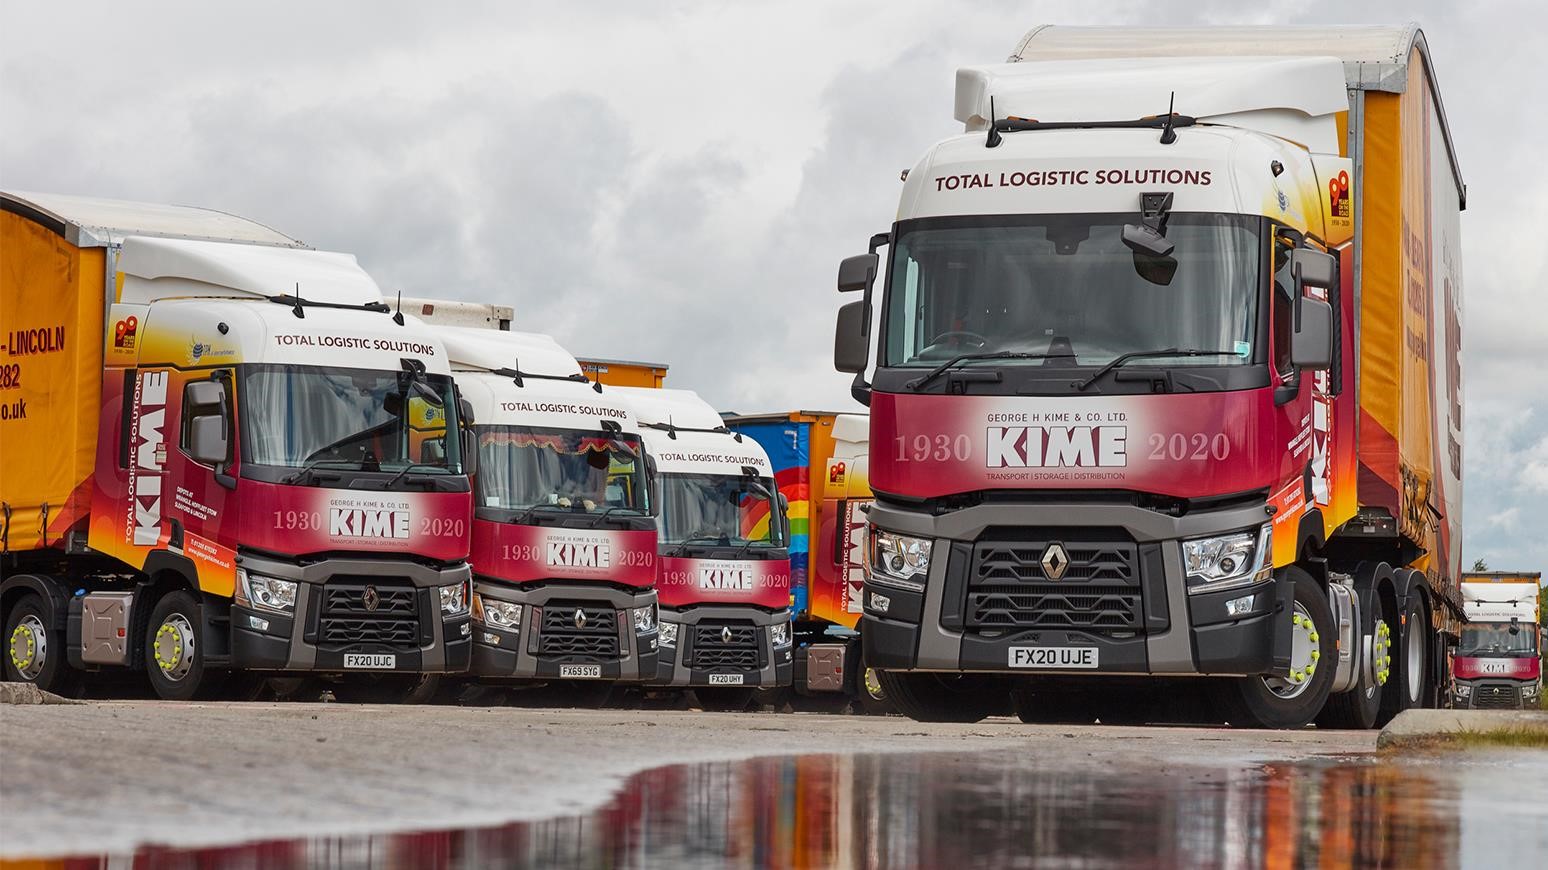 George H Kime & Co Ltd Of Lincolnshire Grows Fleet By 19 New Renault Range T480 Tractor Units